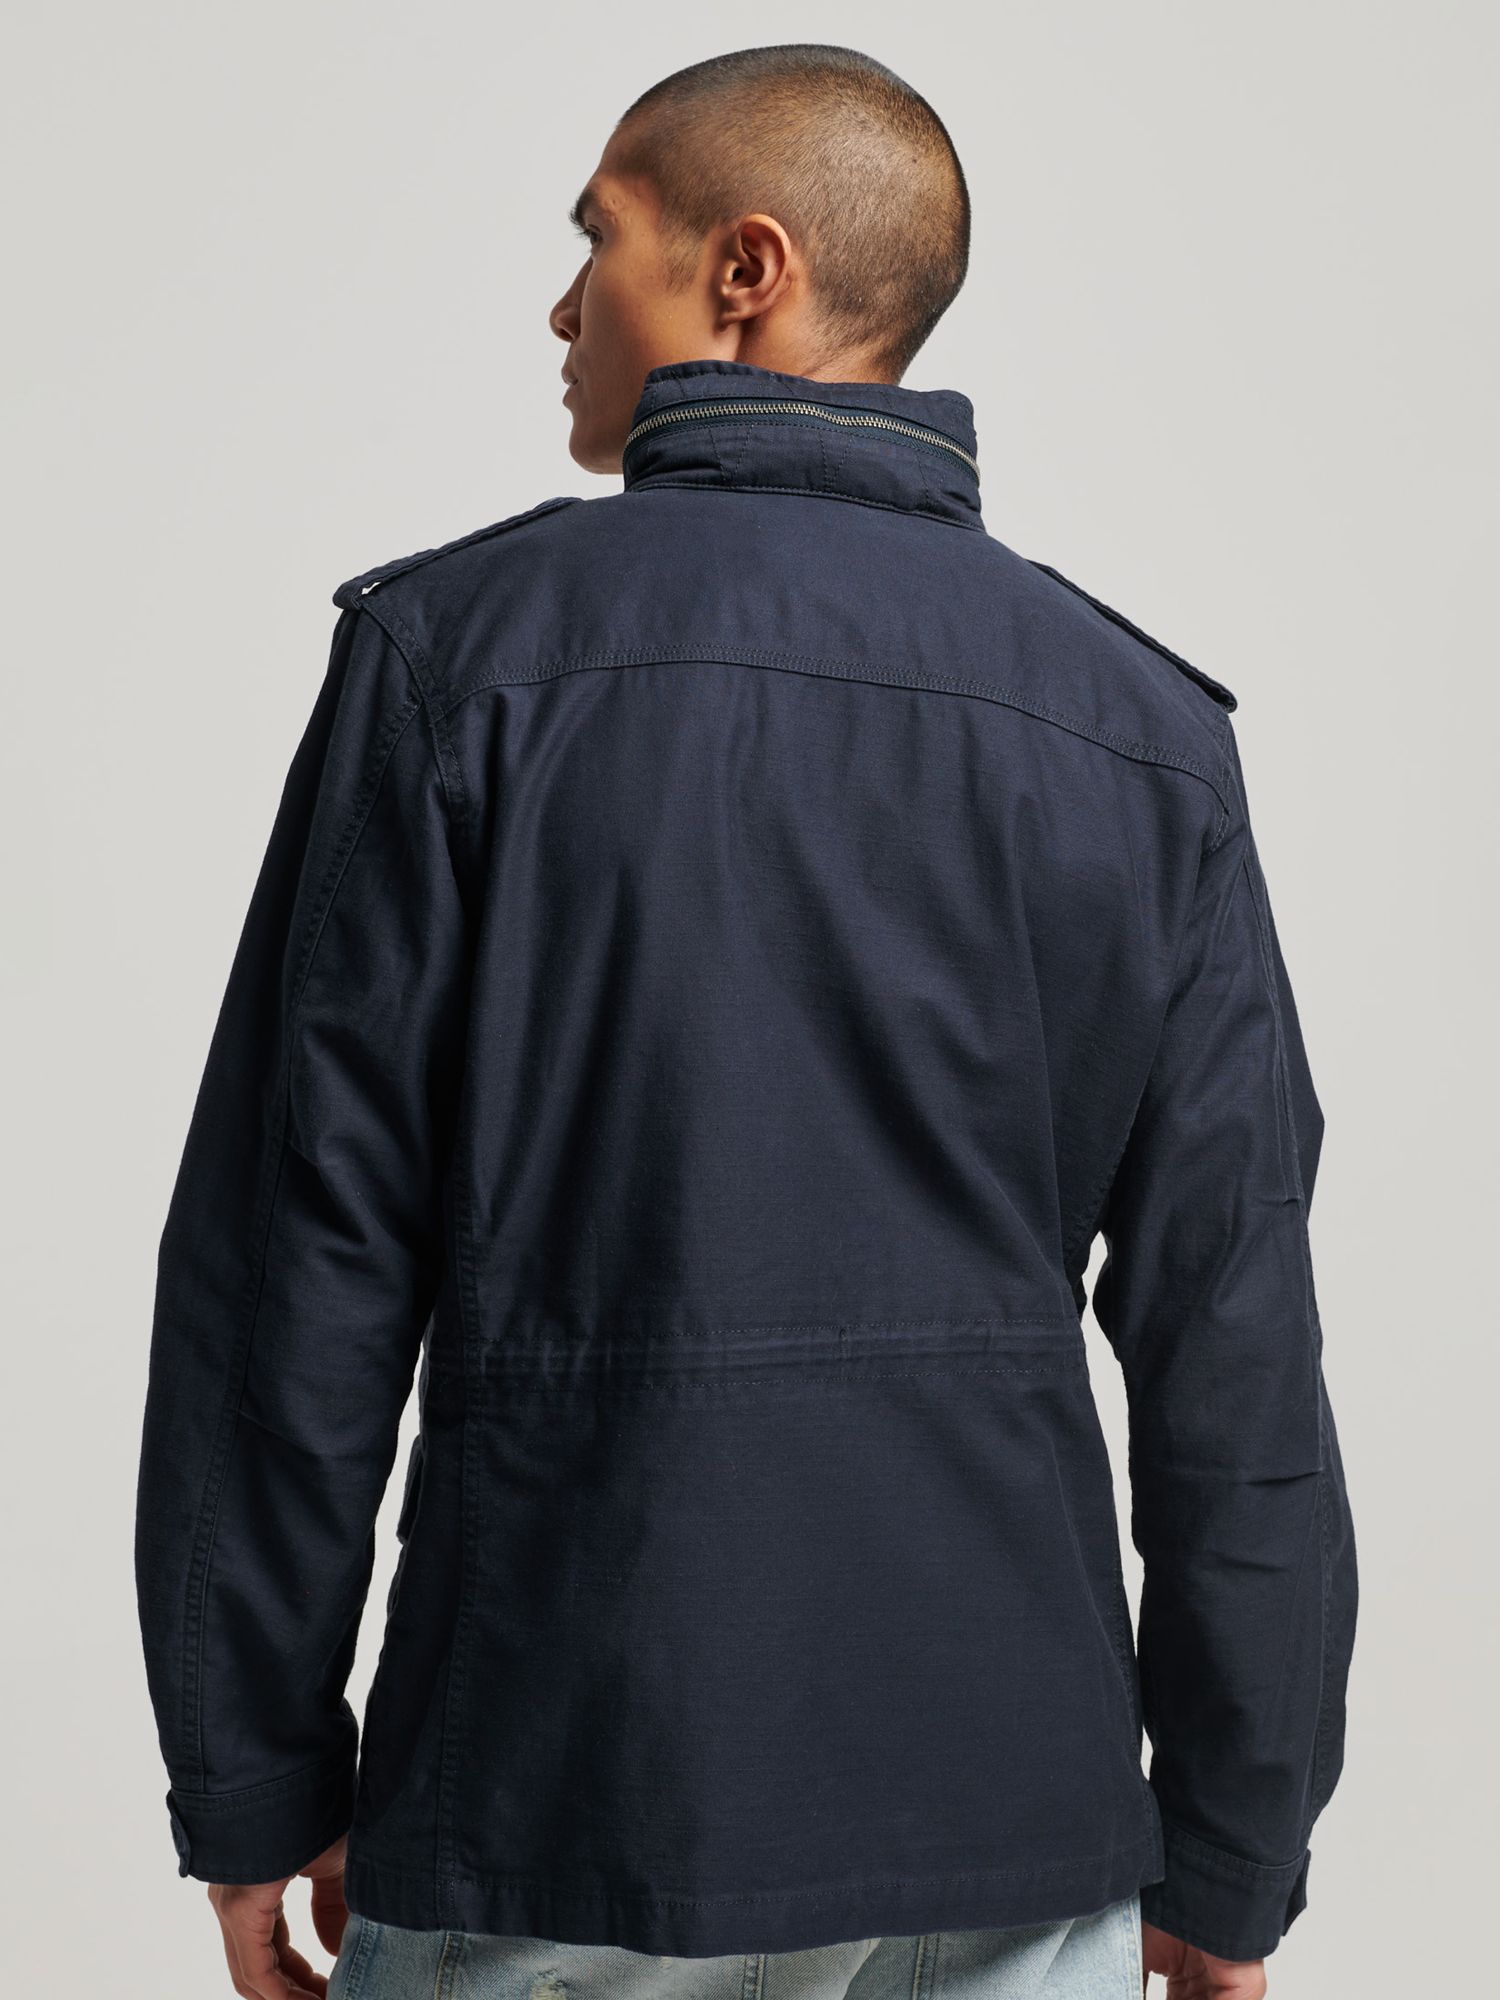 Superdry Military M65 Jacket, Eclipse Navy at John Lewis & Partners